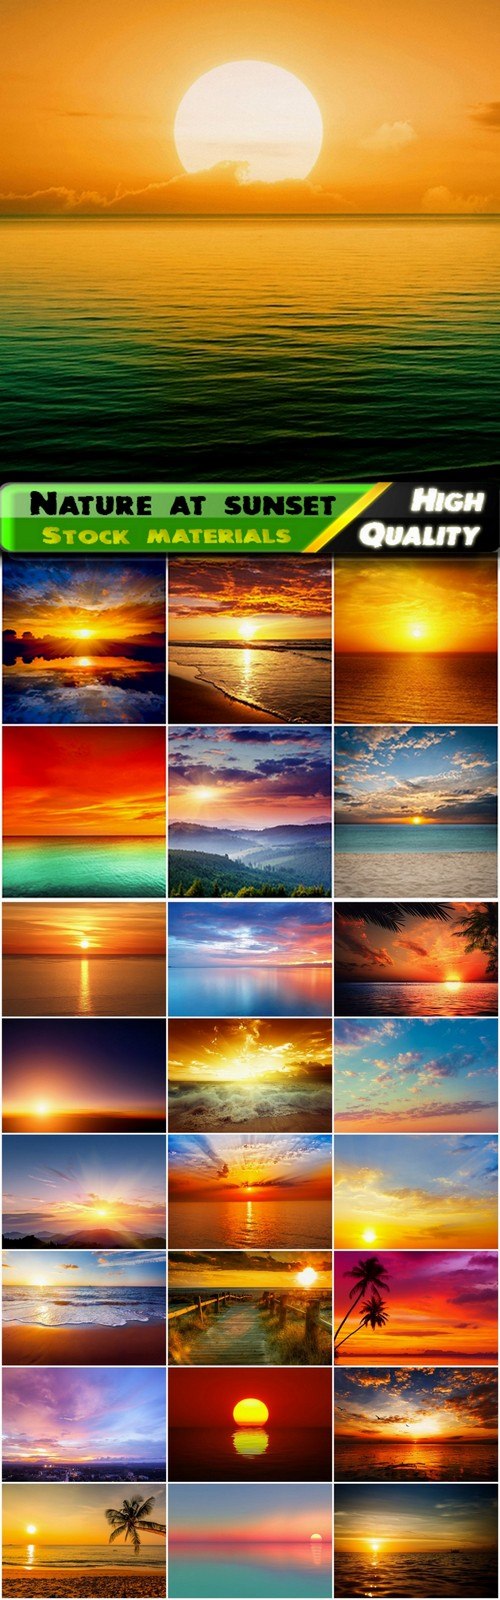 Beaches and landscapes of nature at sunset - 25 HQ Jpg